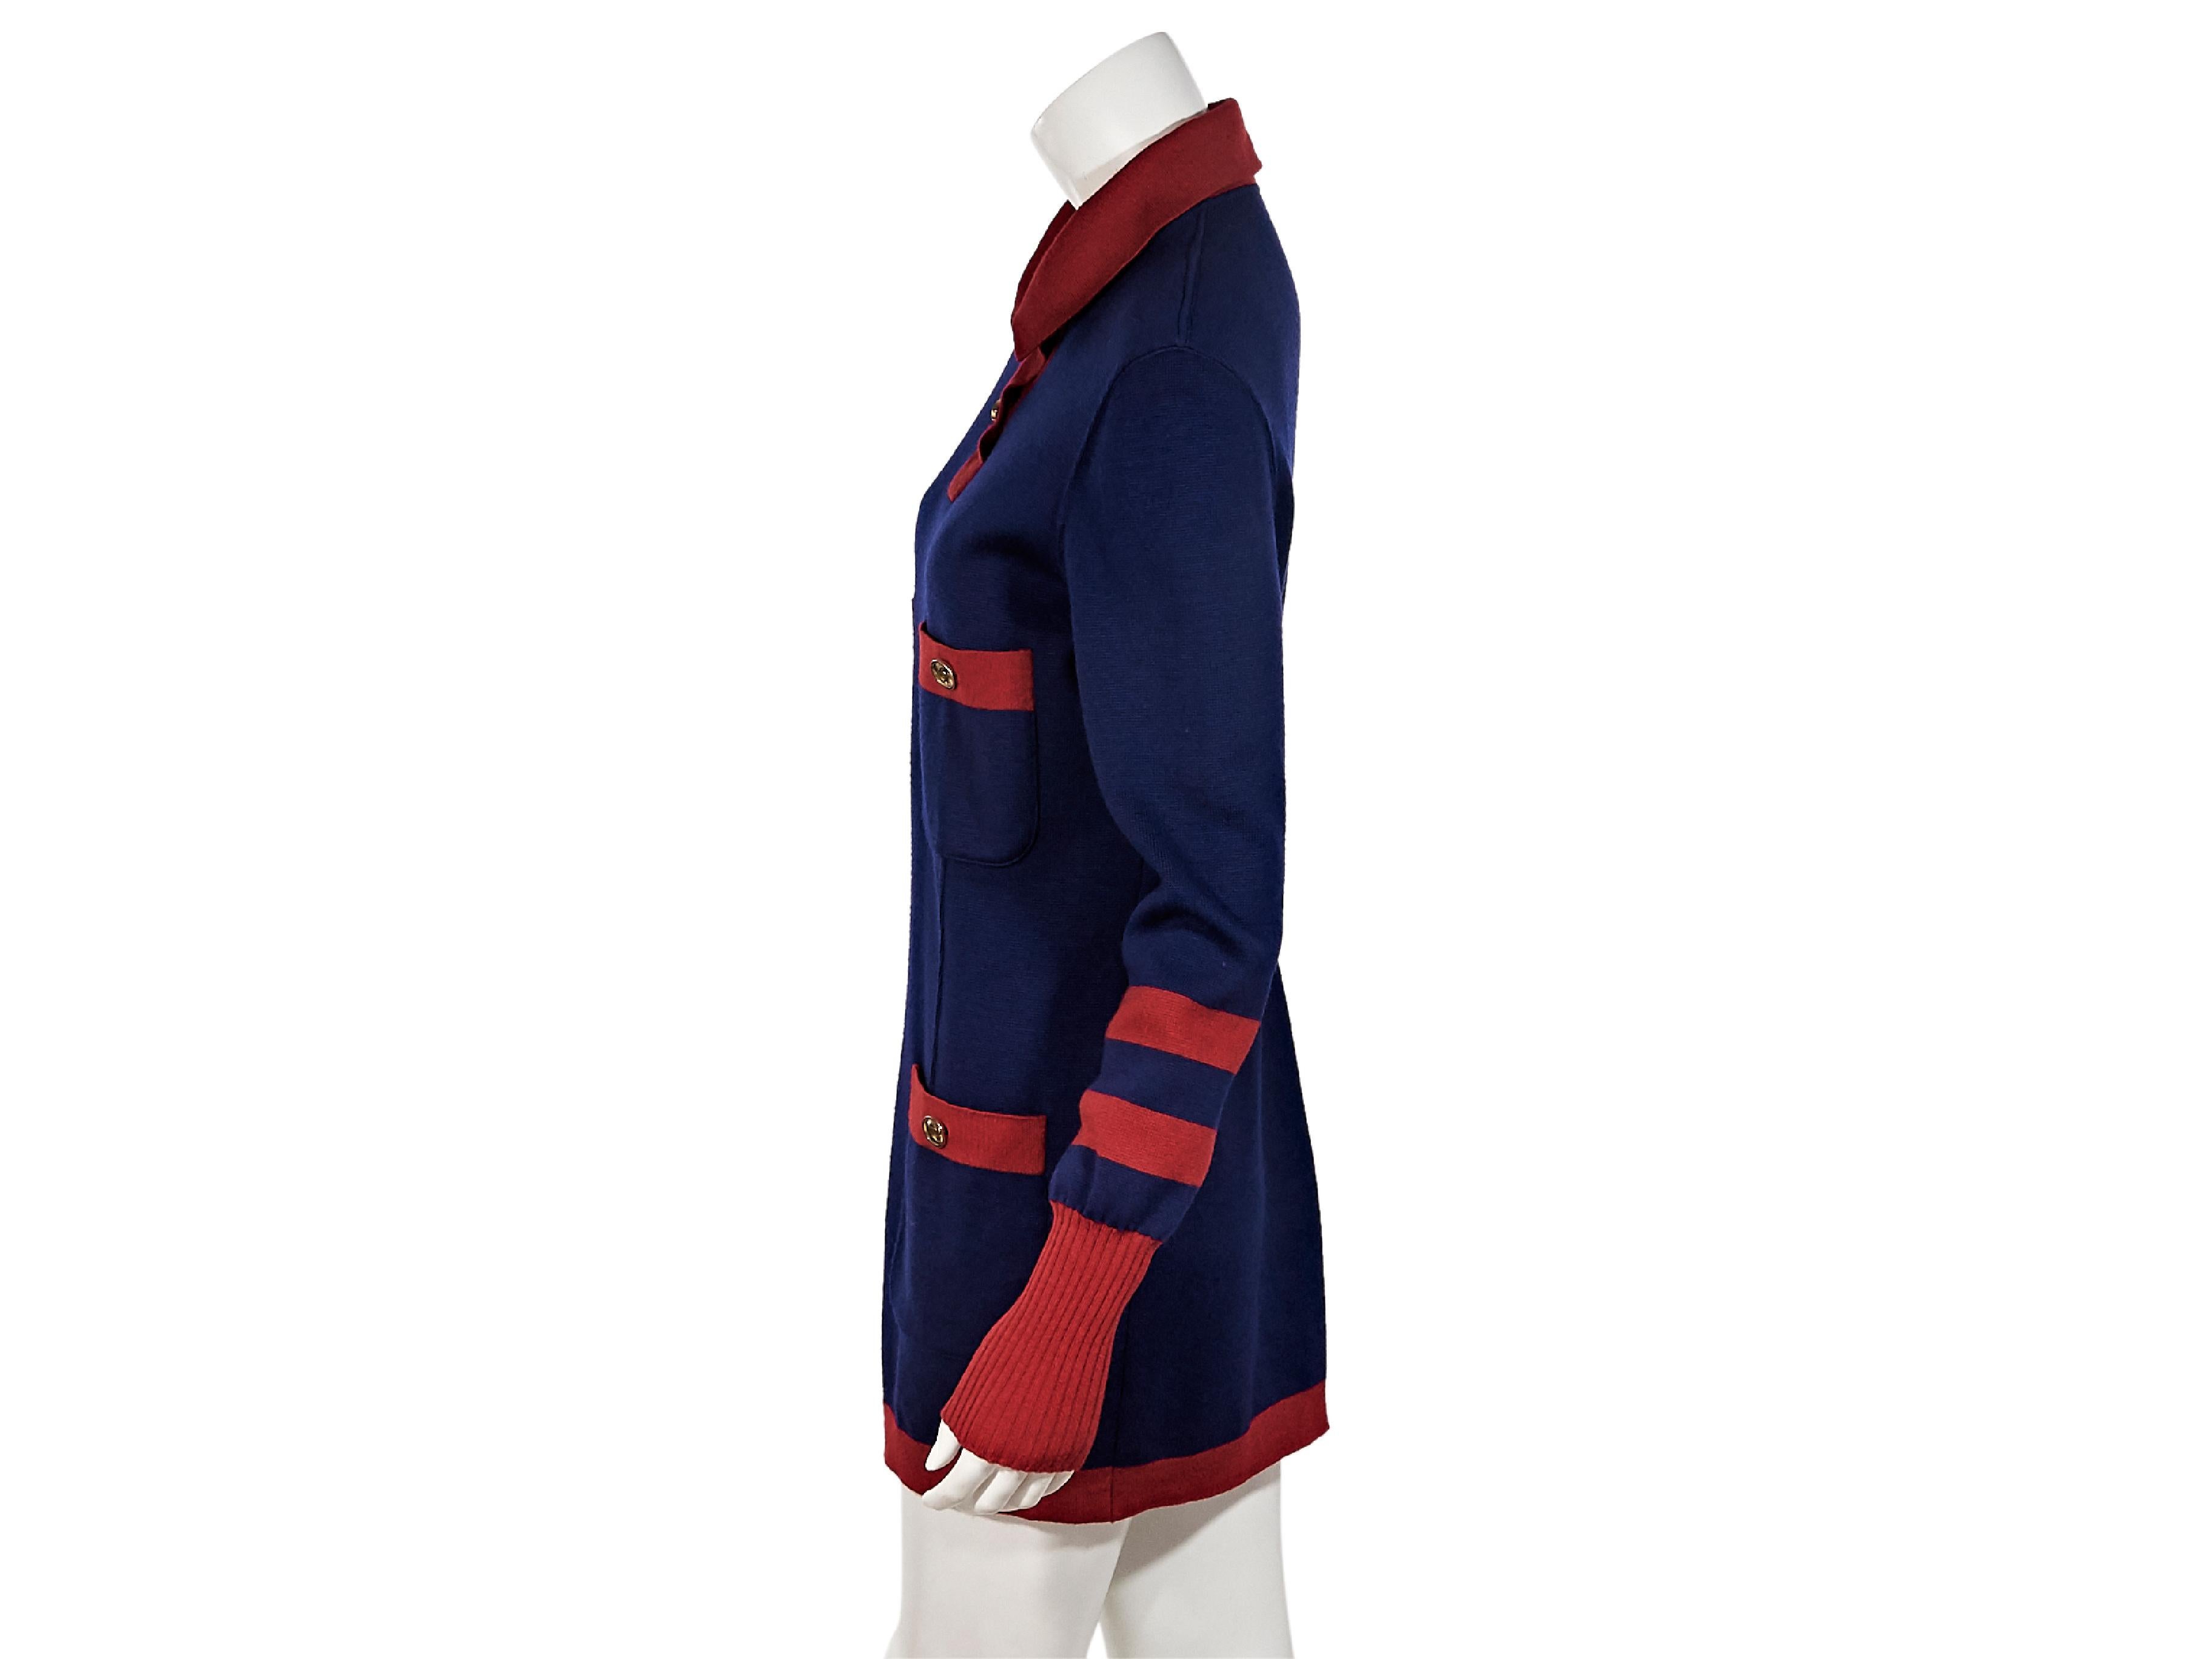 Product details:  Blue and red knit sweater dress by Chanel.  Point collar.  Two-button placket.  Long sleeves.  Ribbed cuffs.  Chest and waist button patch pockets.  Pullover style.  Goldtone hardware.  38